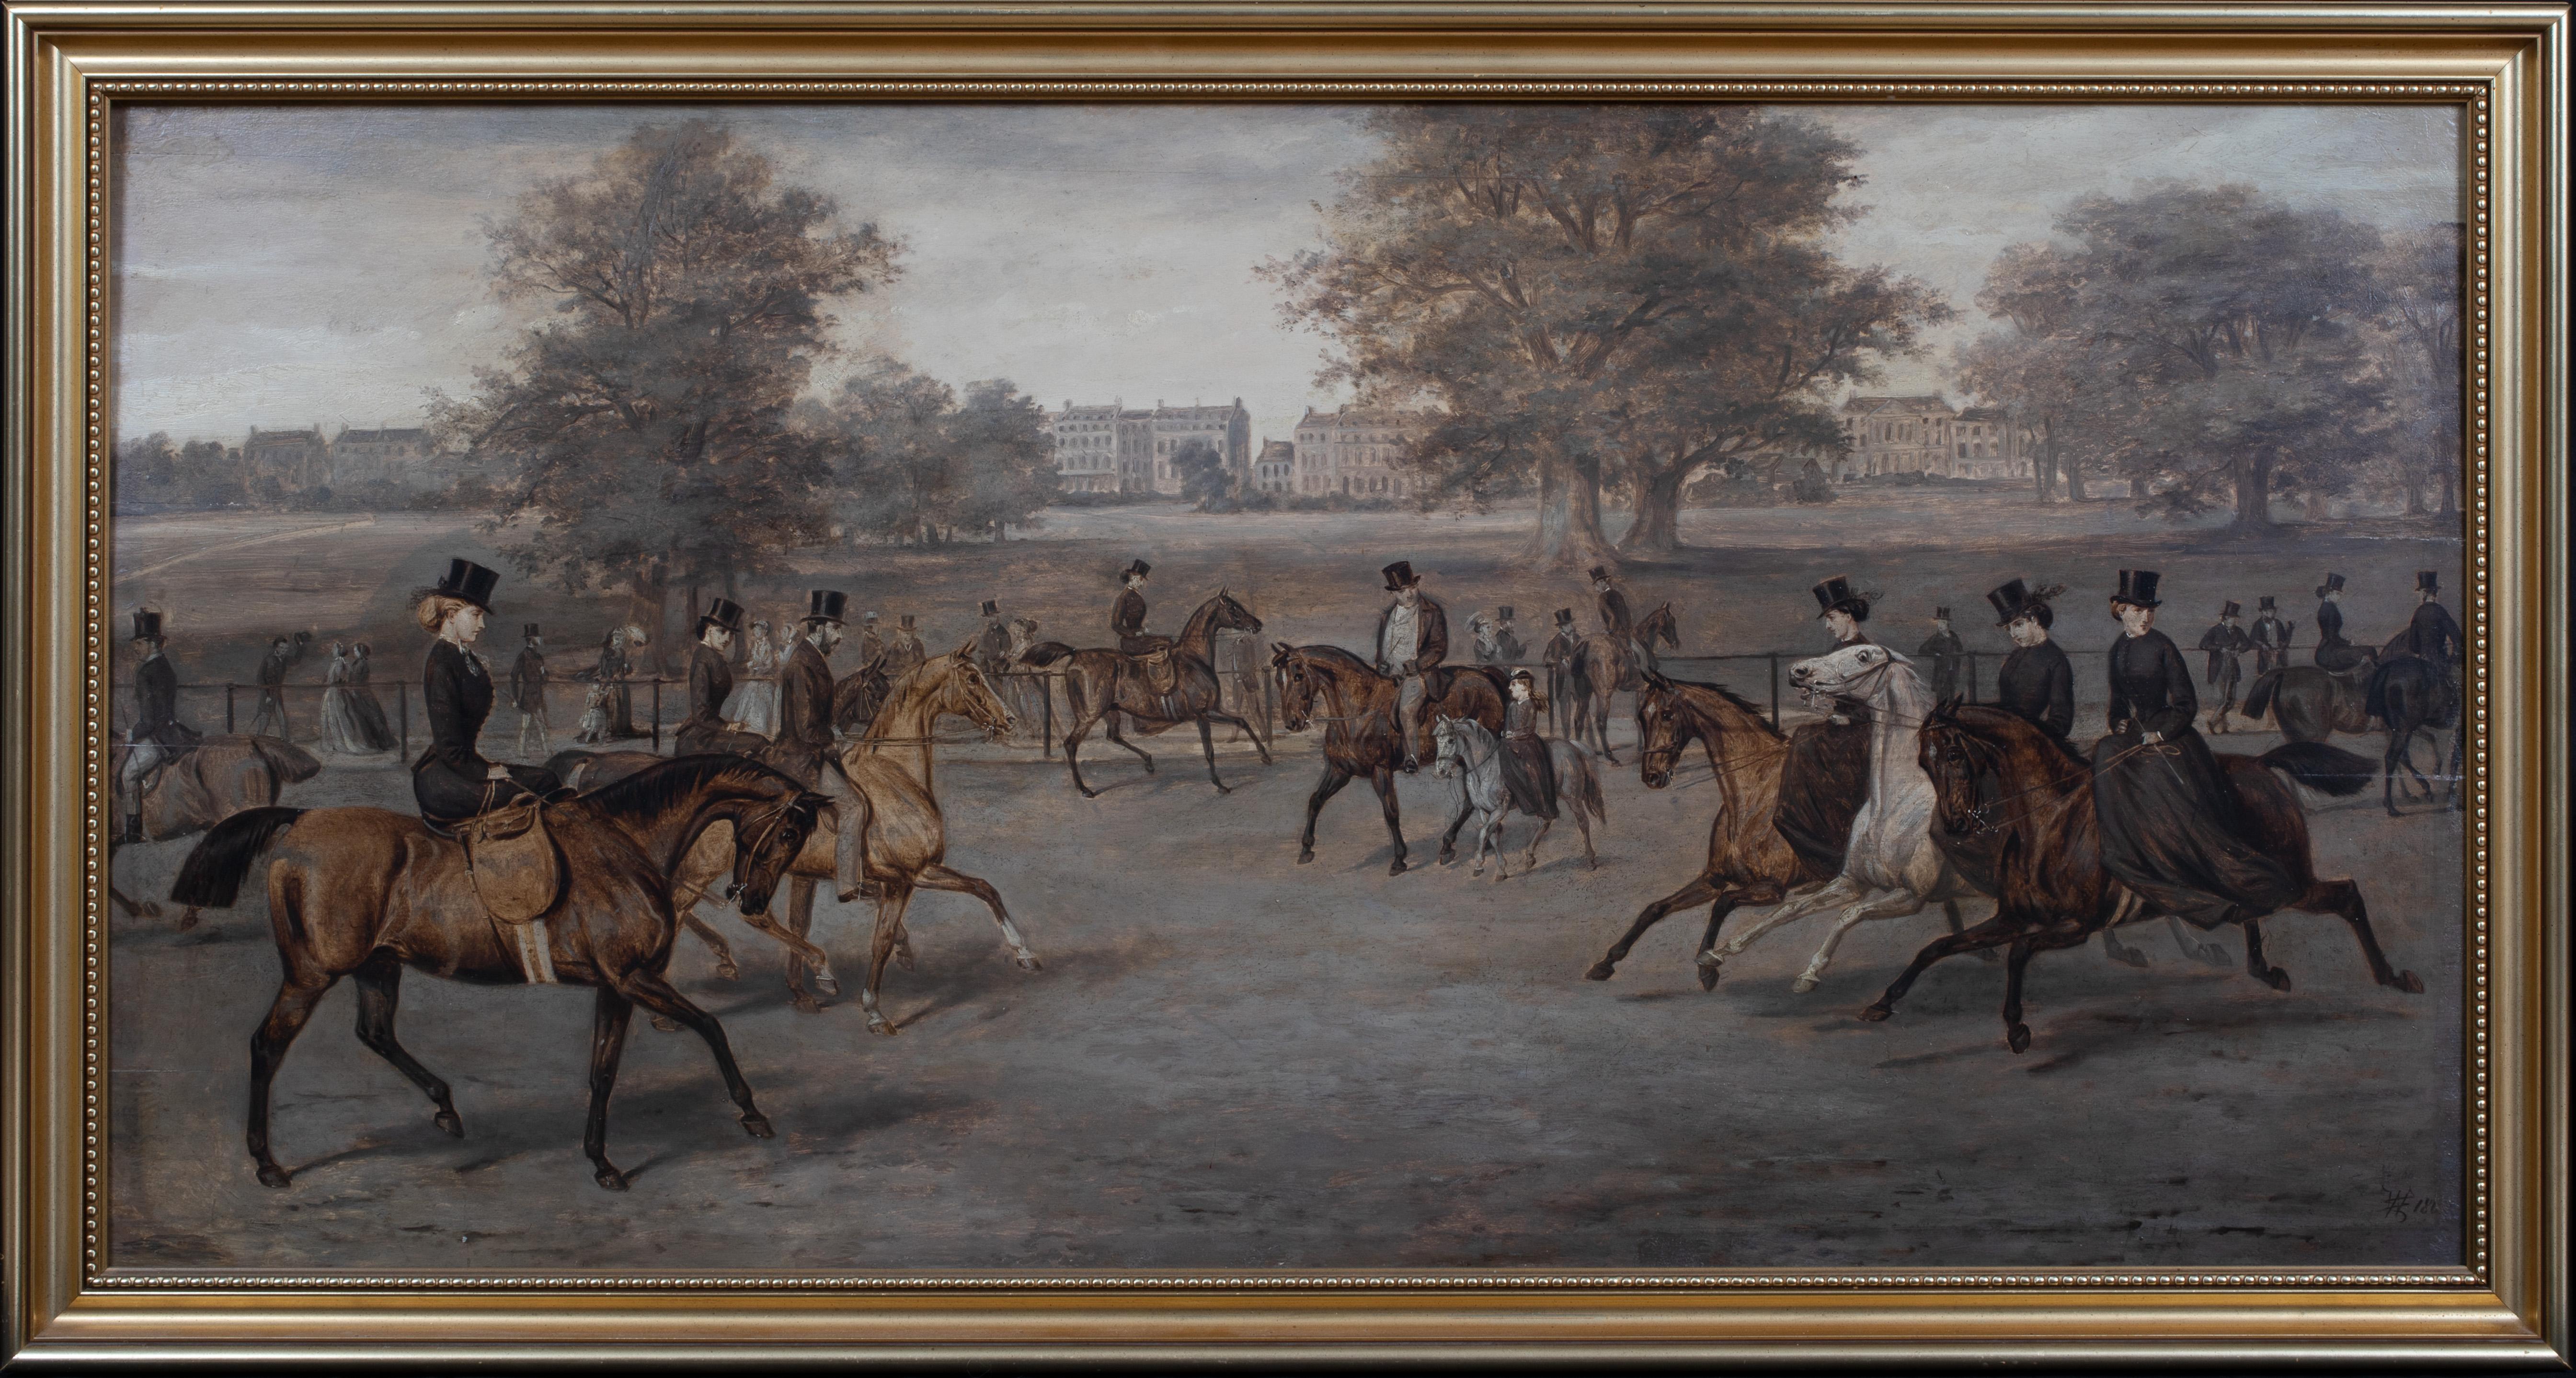 Horse Riding At Rotten Row, Hyde Park, London, 19th Century  - Painting by William Henry Wheelwright